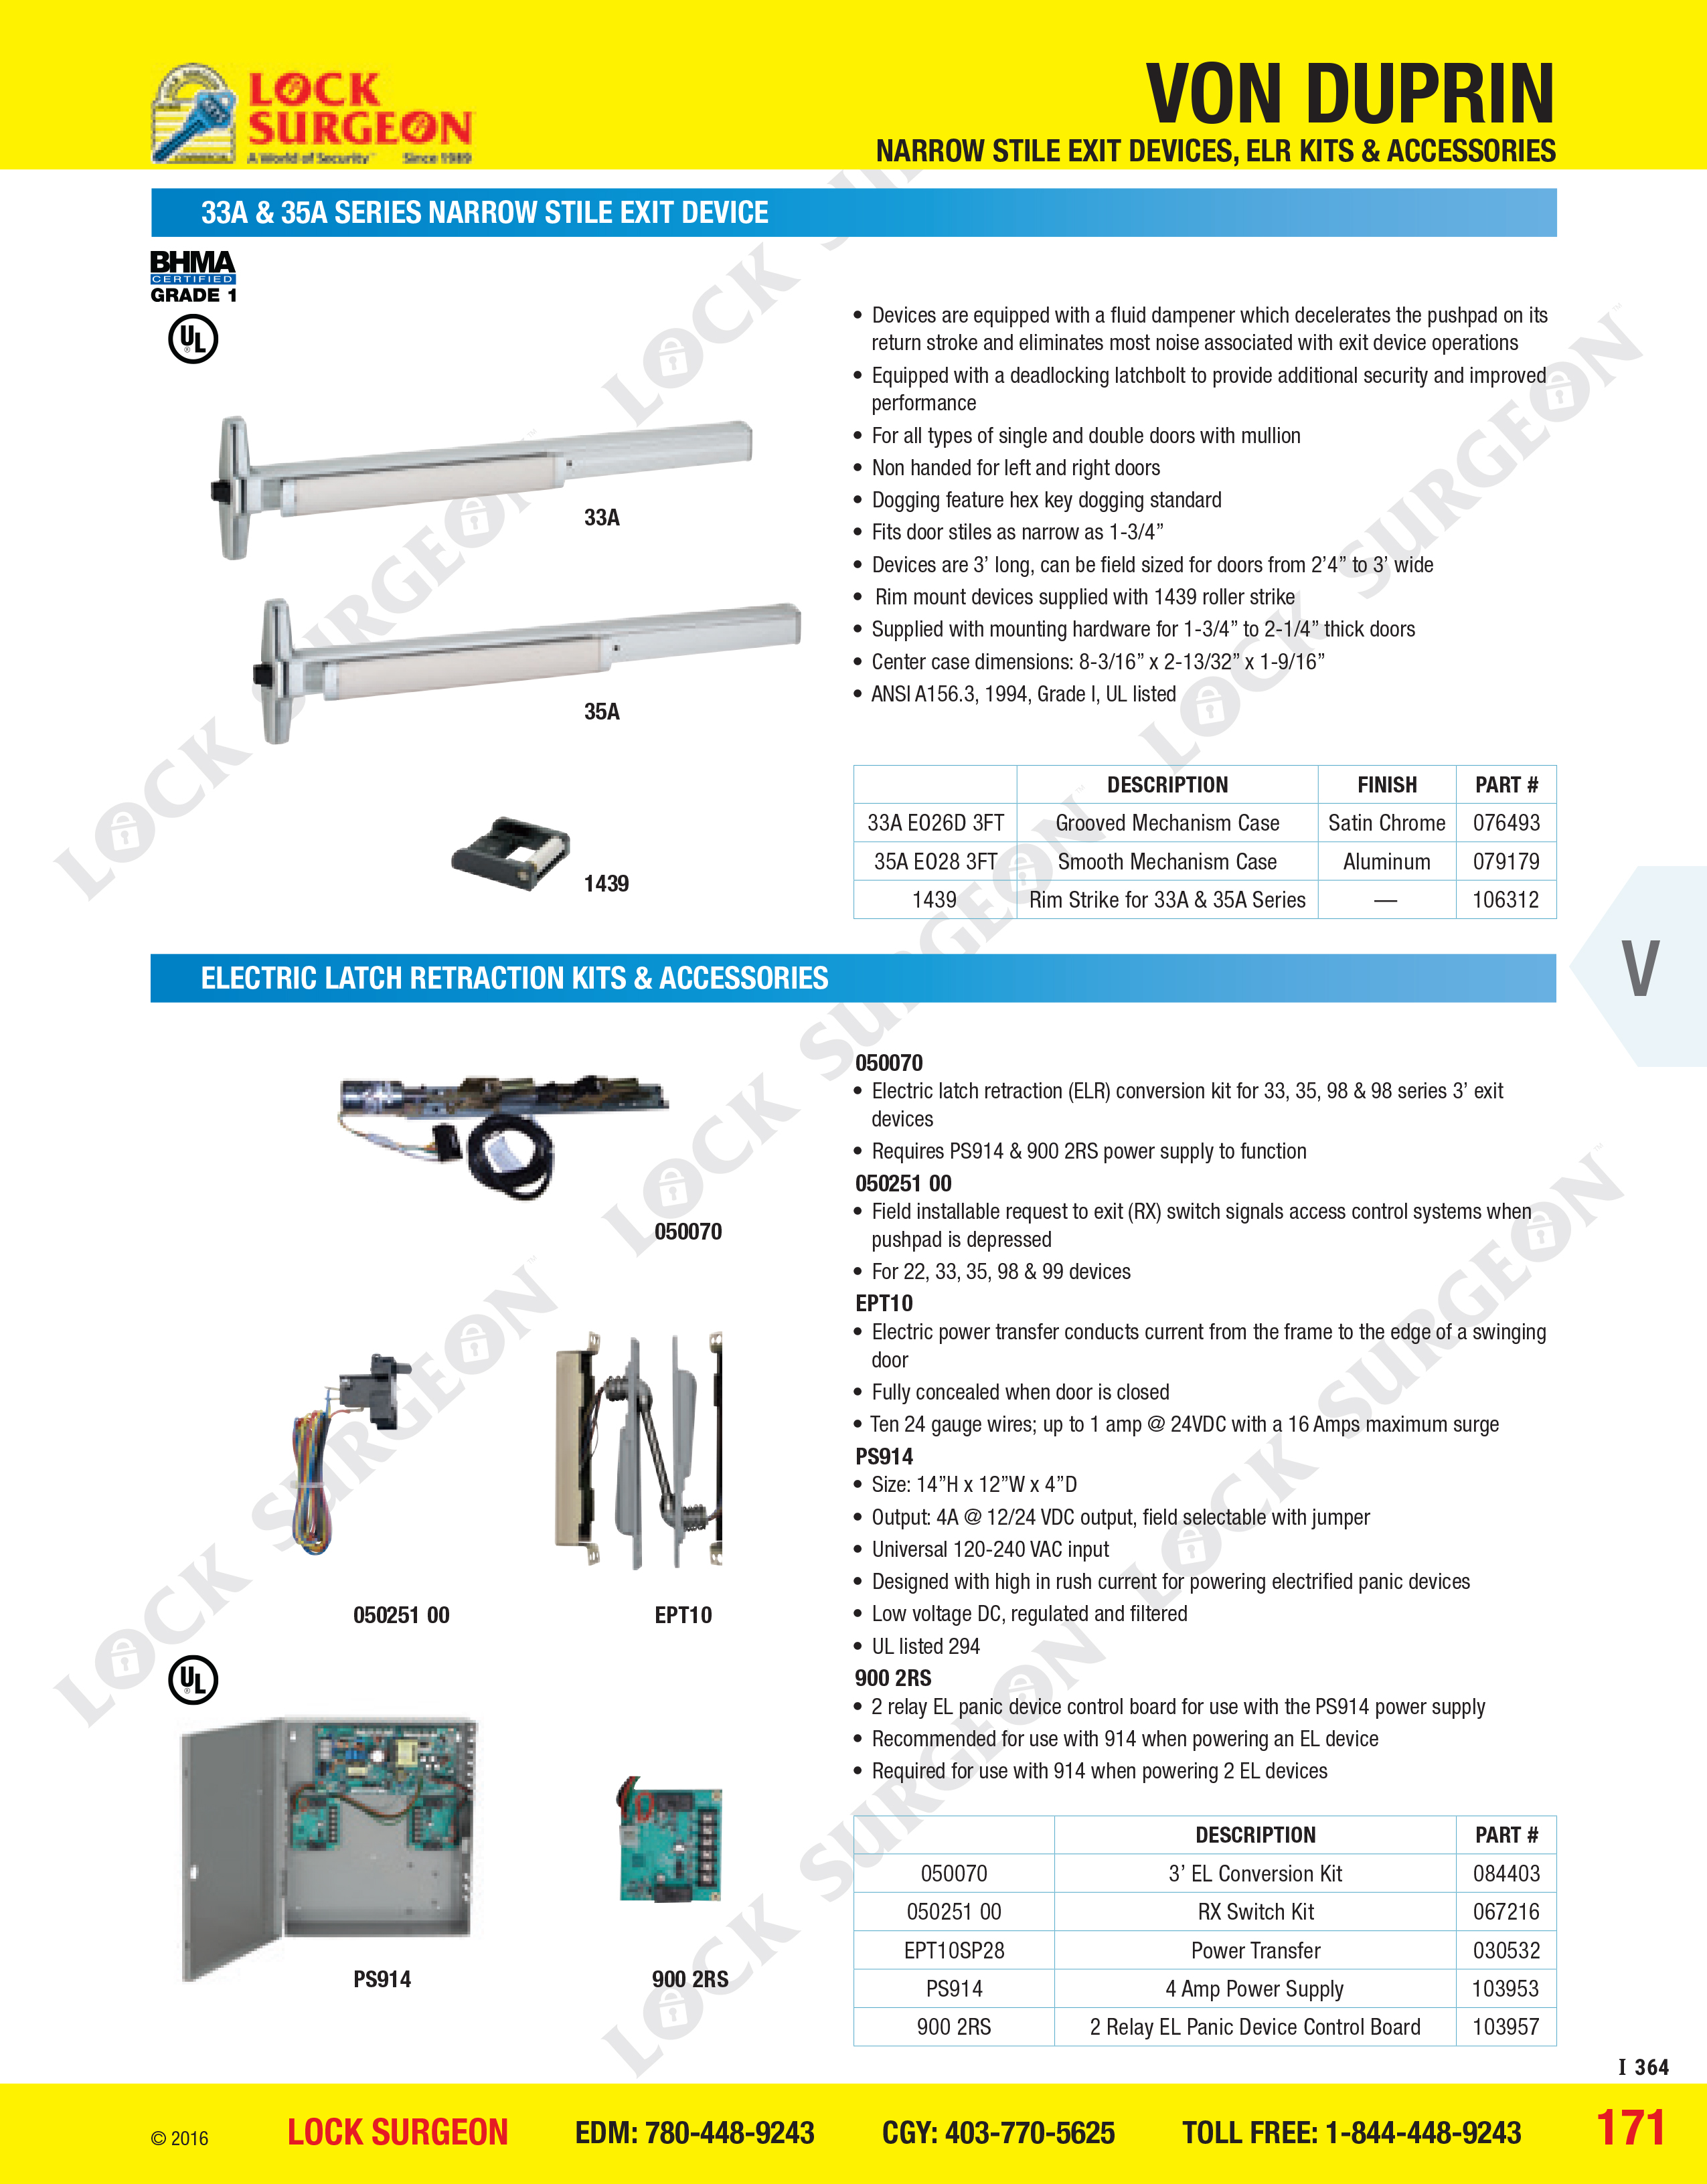 Von Duprin narrow stile exit devices electronic latch retraction kits and accessories.